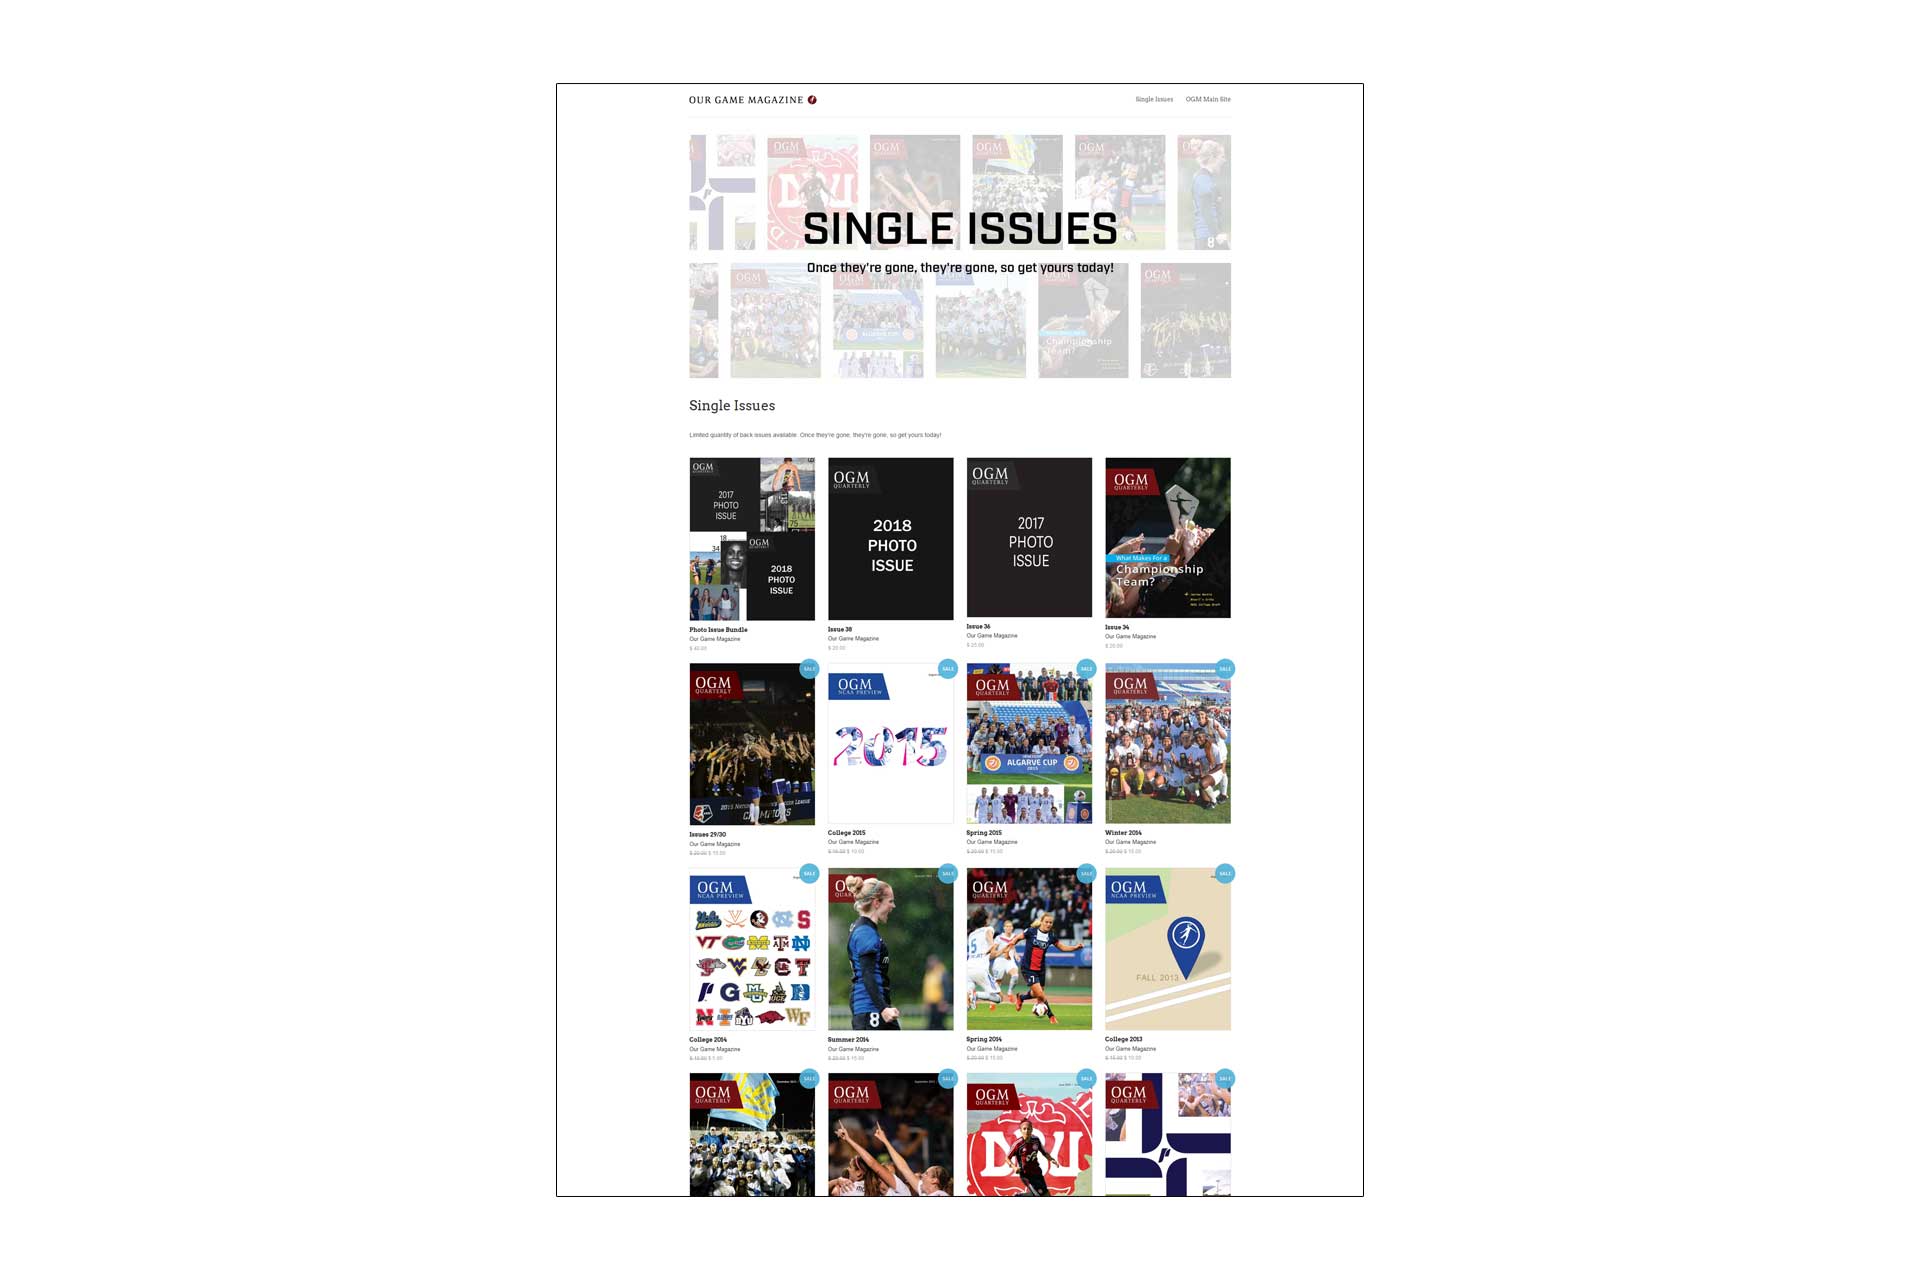 Our Game Magazine online store